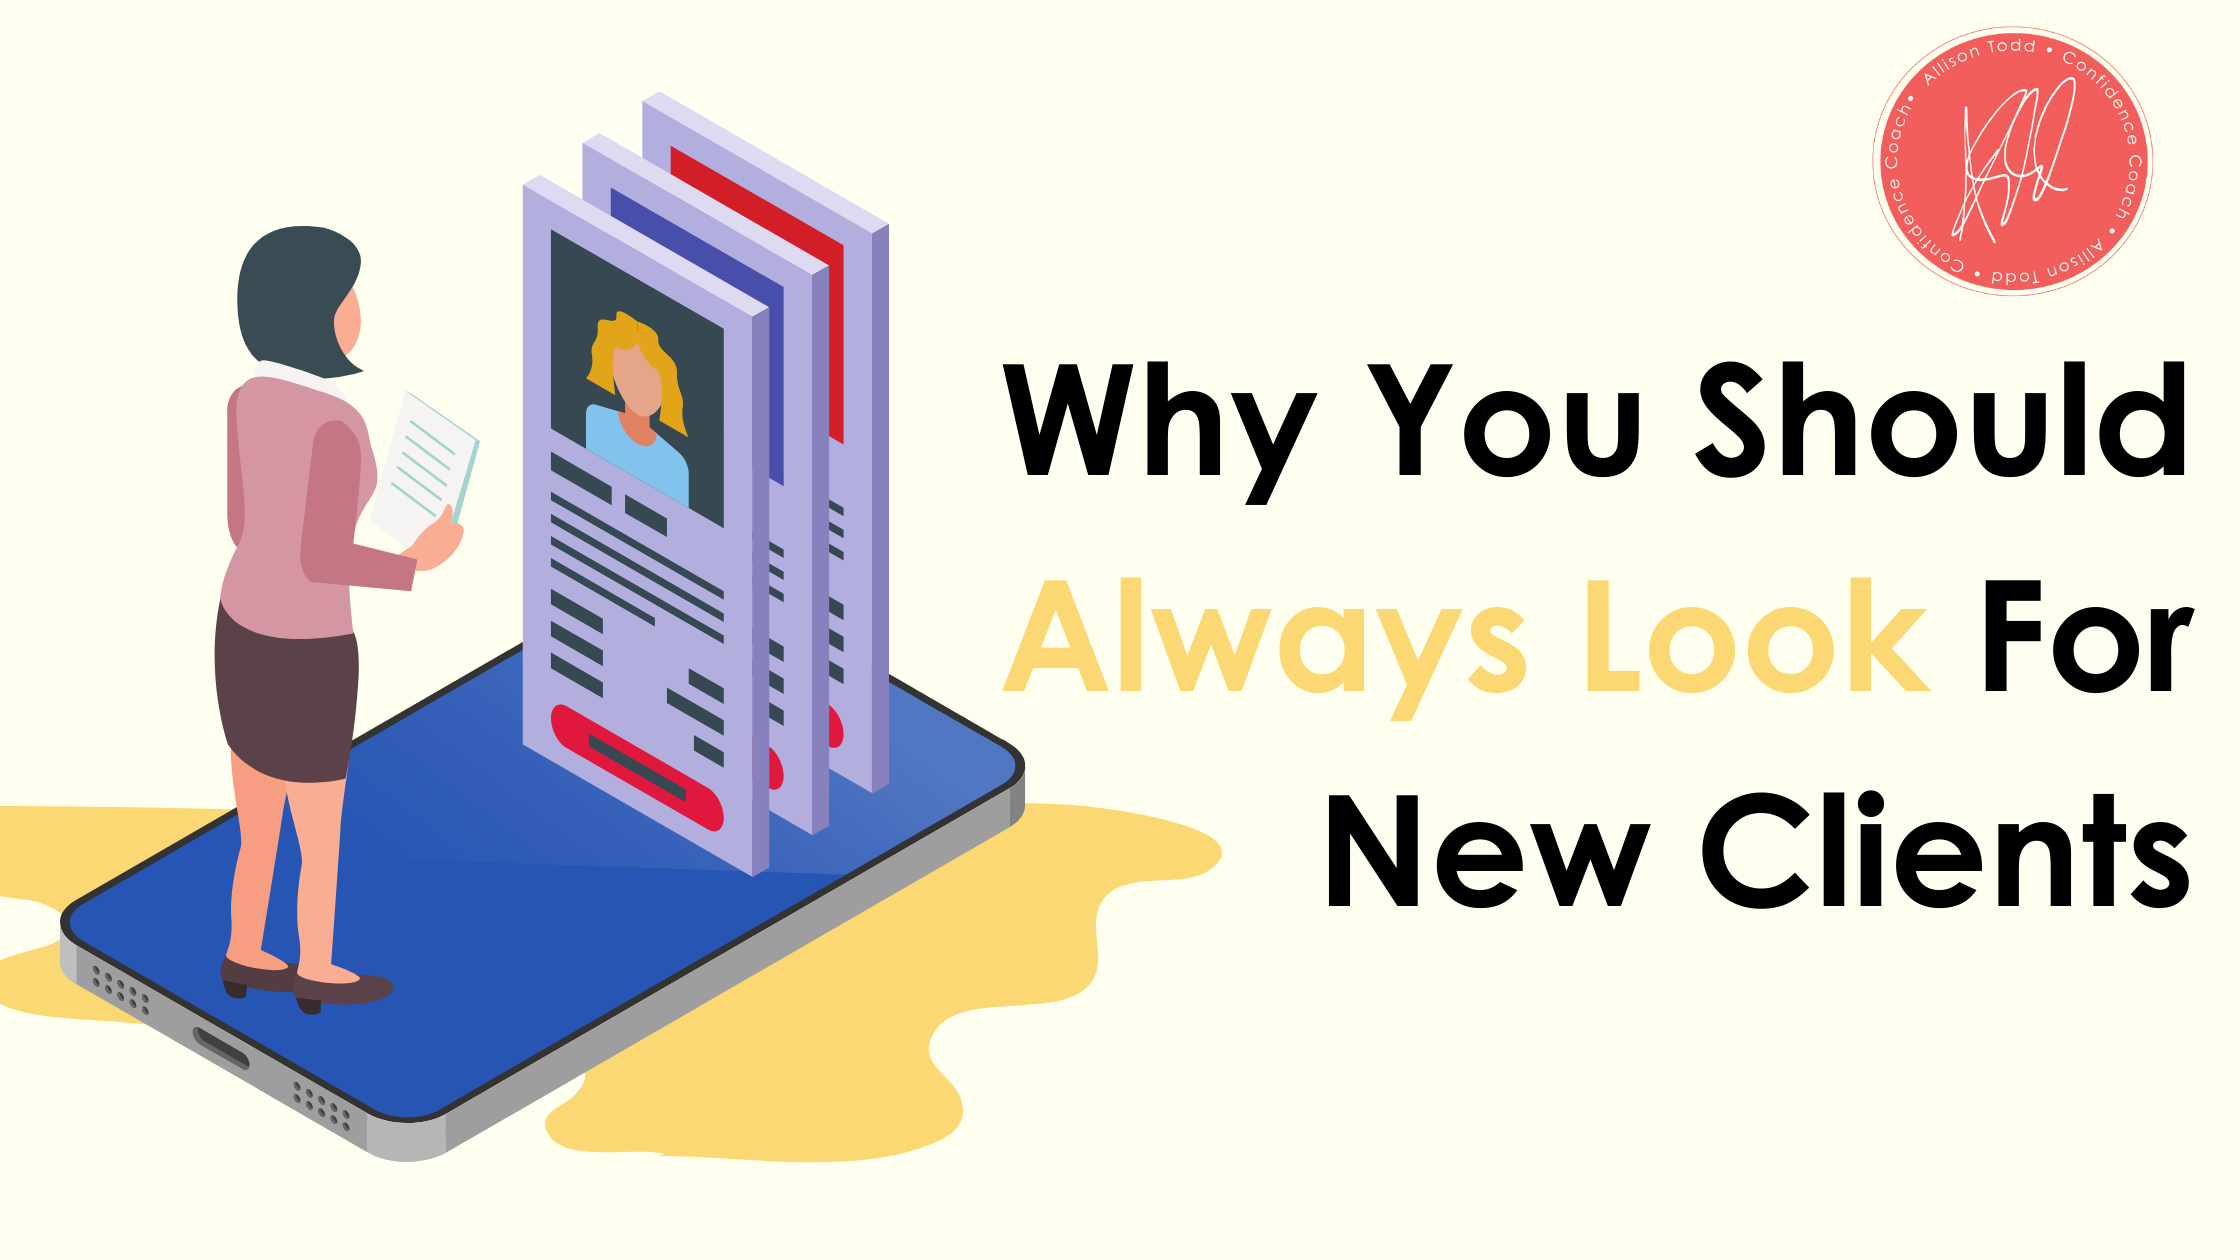 Why You Should Always Look For New Clients